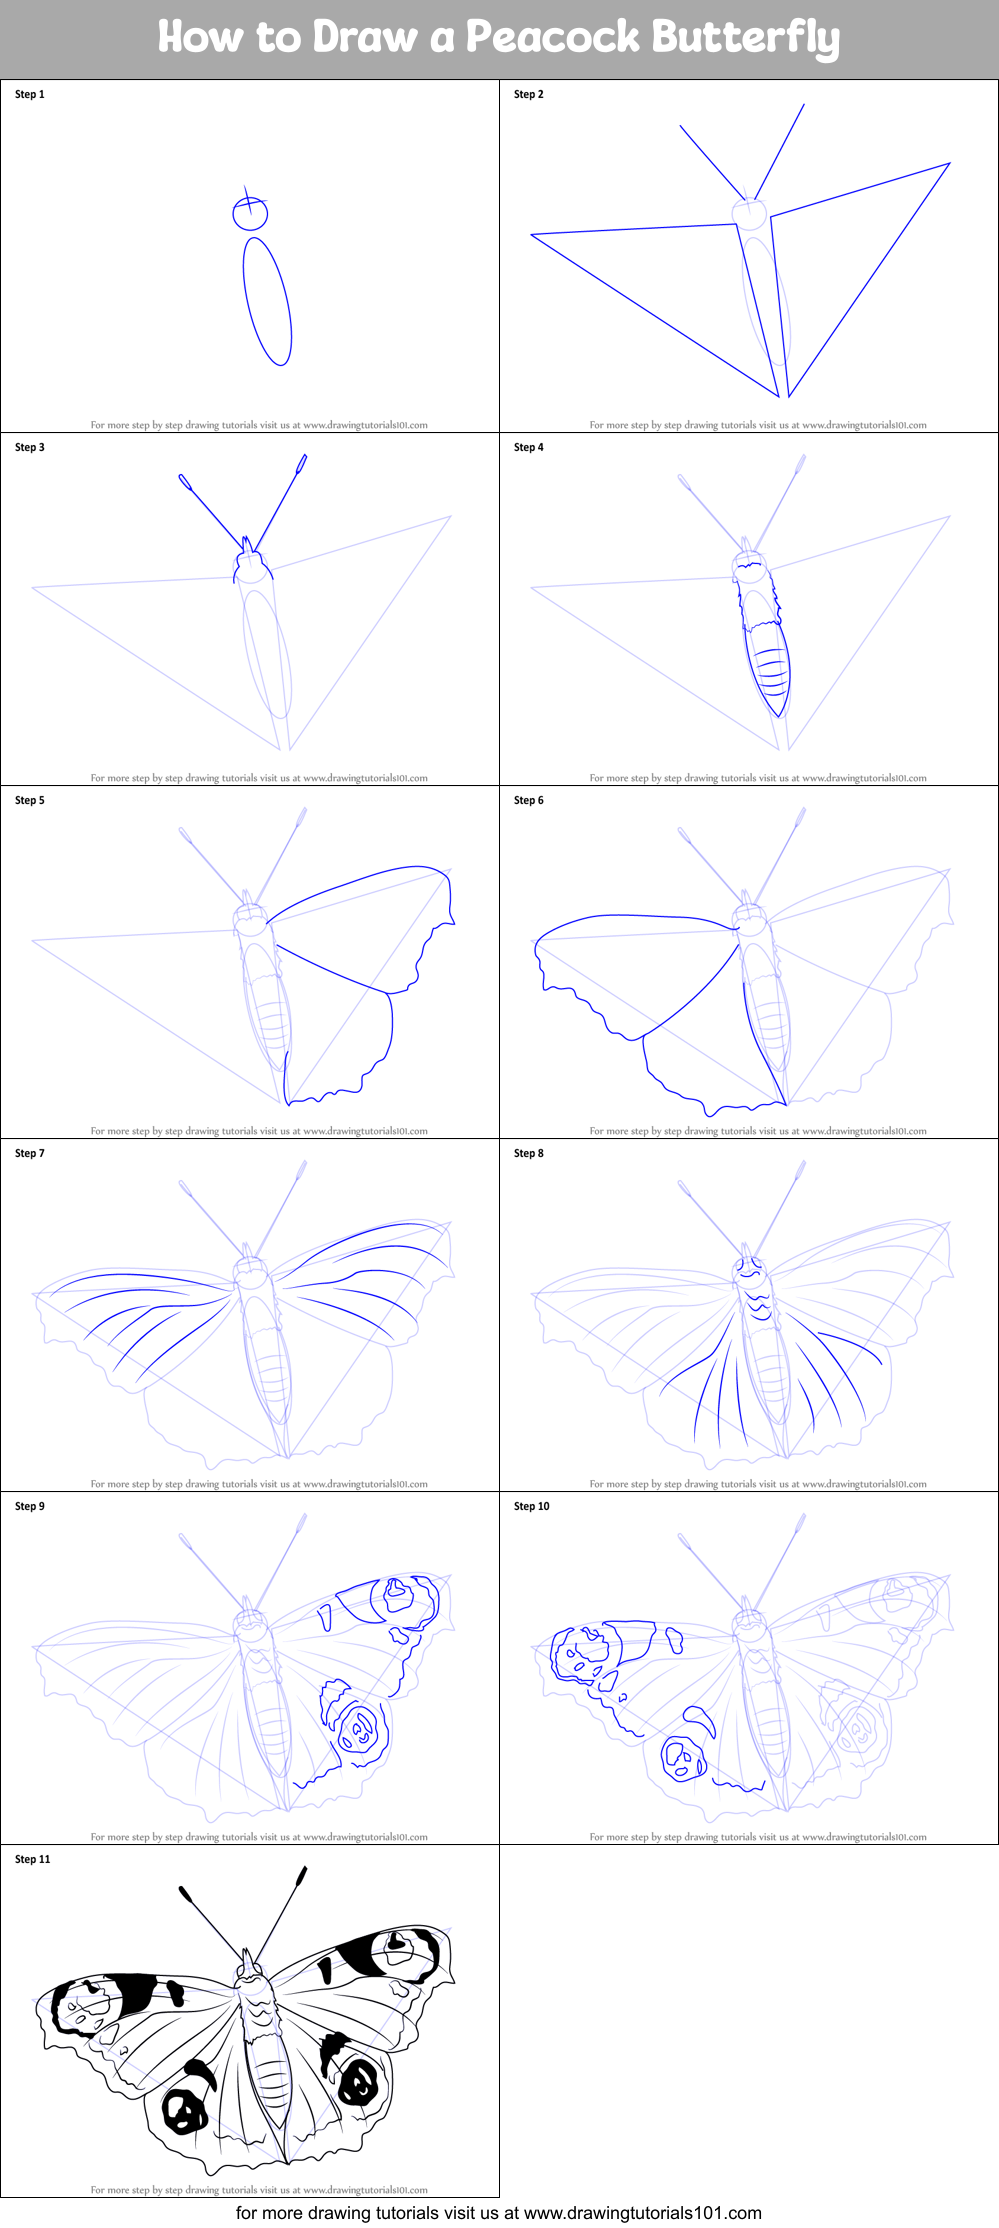 How To Draw A Peacock Butterfly Printable Step By Step Drawing Sheet Drawingtutorials101 Com This is also an easy step by step tutorial for beginners. draw a peacock butterfly printable step